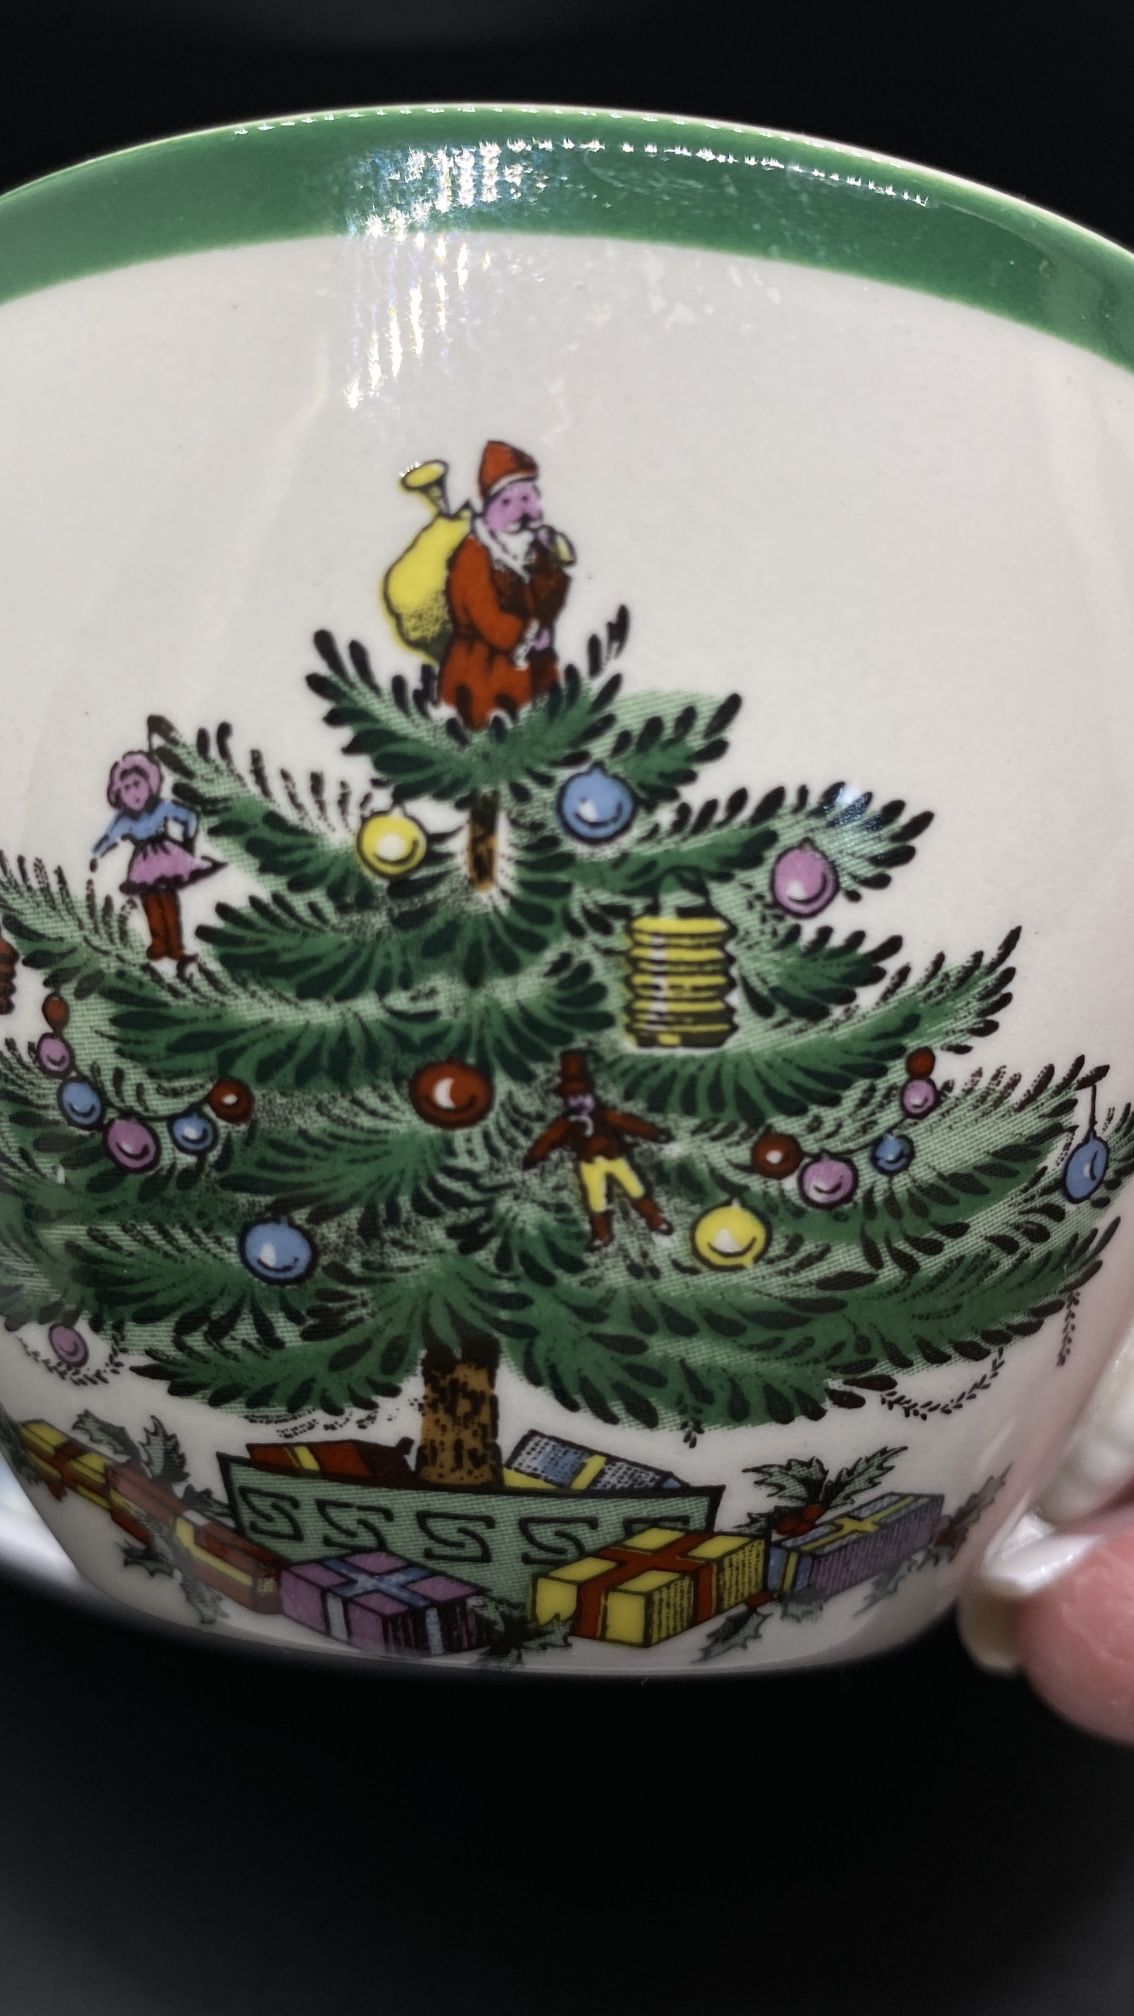 Vintage Spode Christmas Tree Coffee / Tea Cup 1980’s England Mint Condition